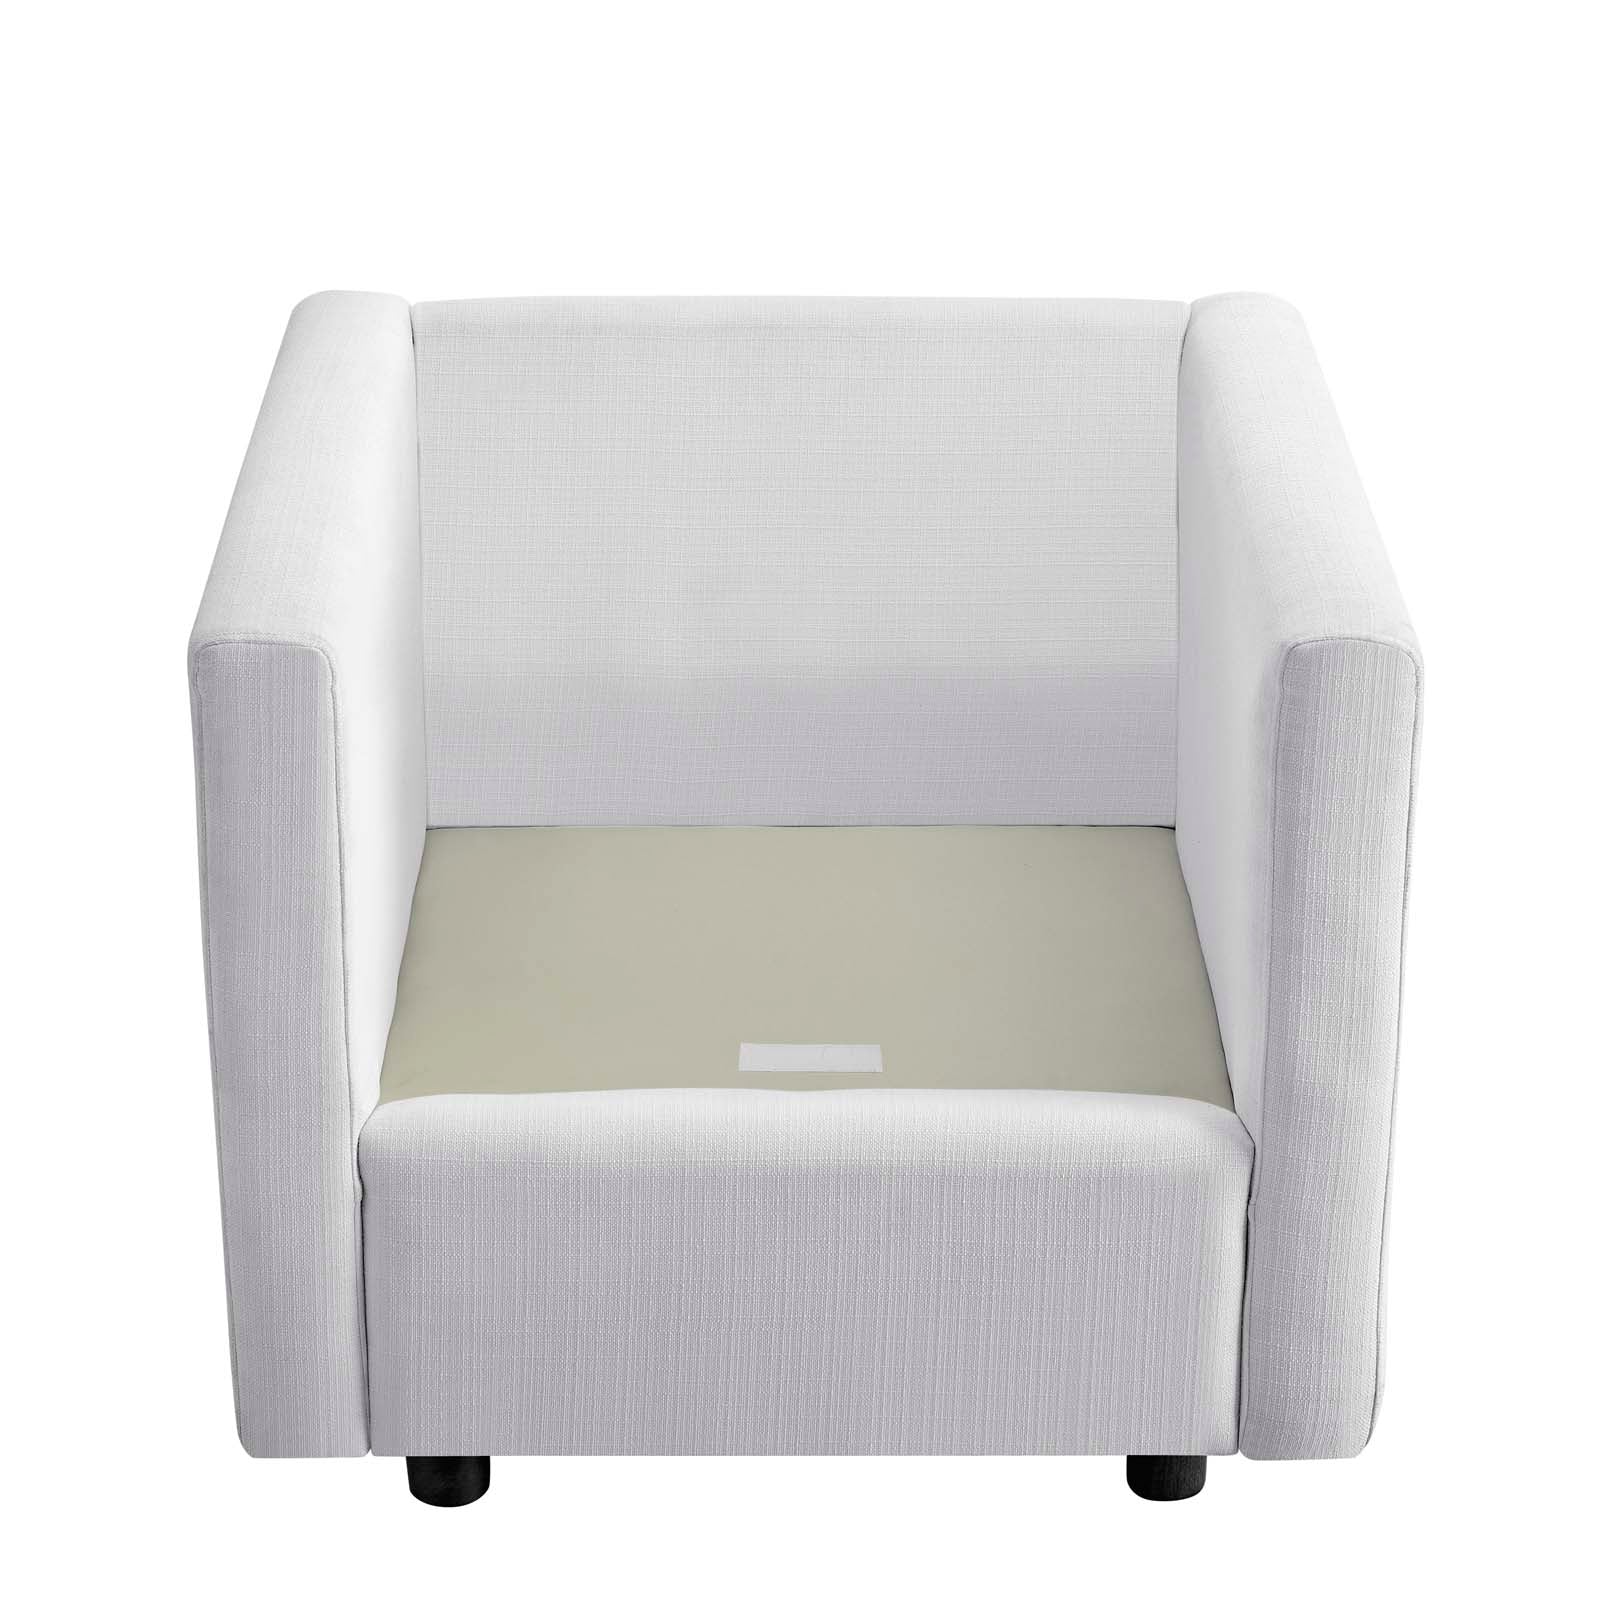 Modway Accent Chairs - Activate Upholstered Fabric Armchair White